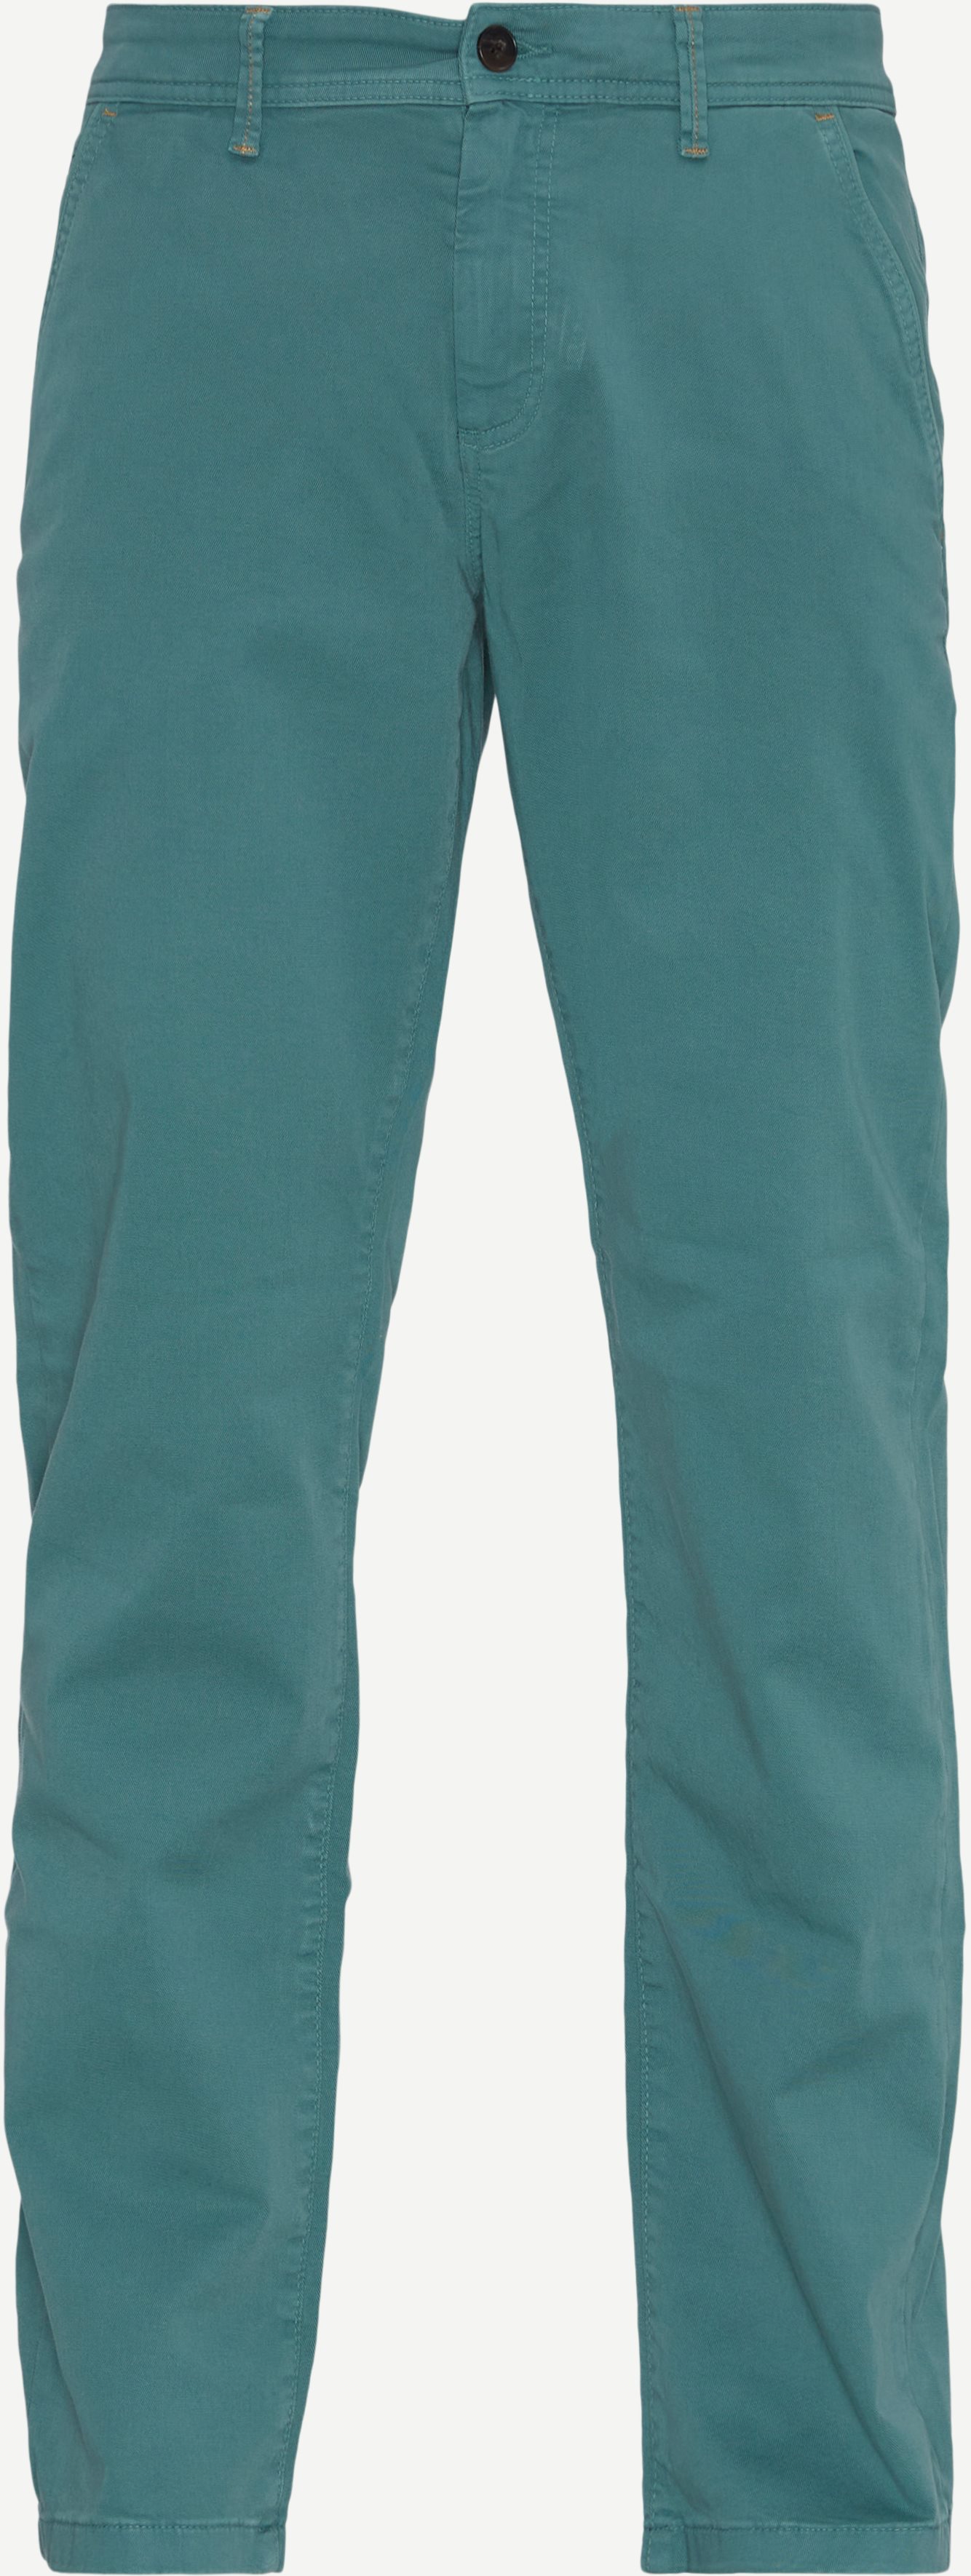 Signal Trousers 11277/21277 607 Green